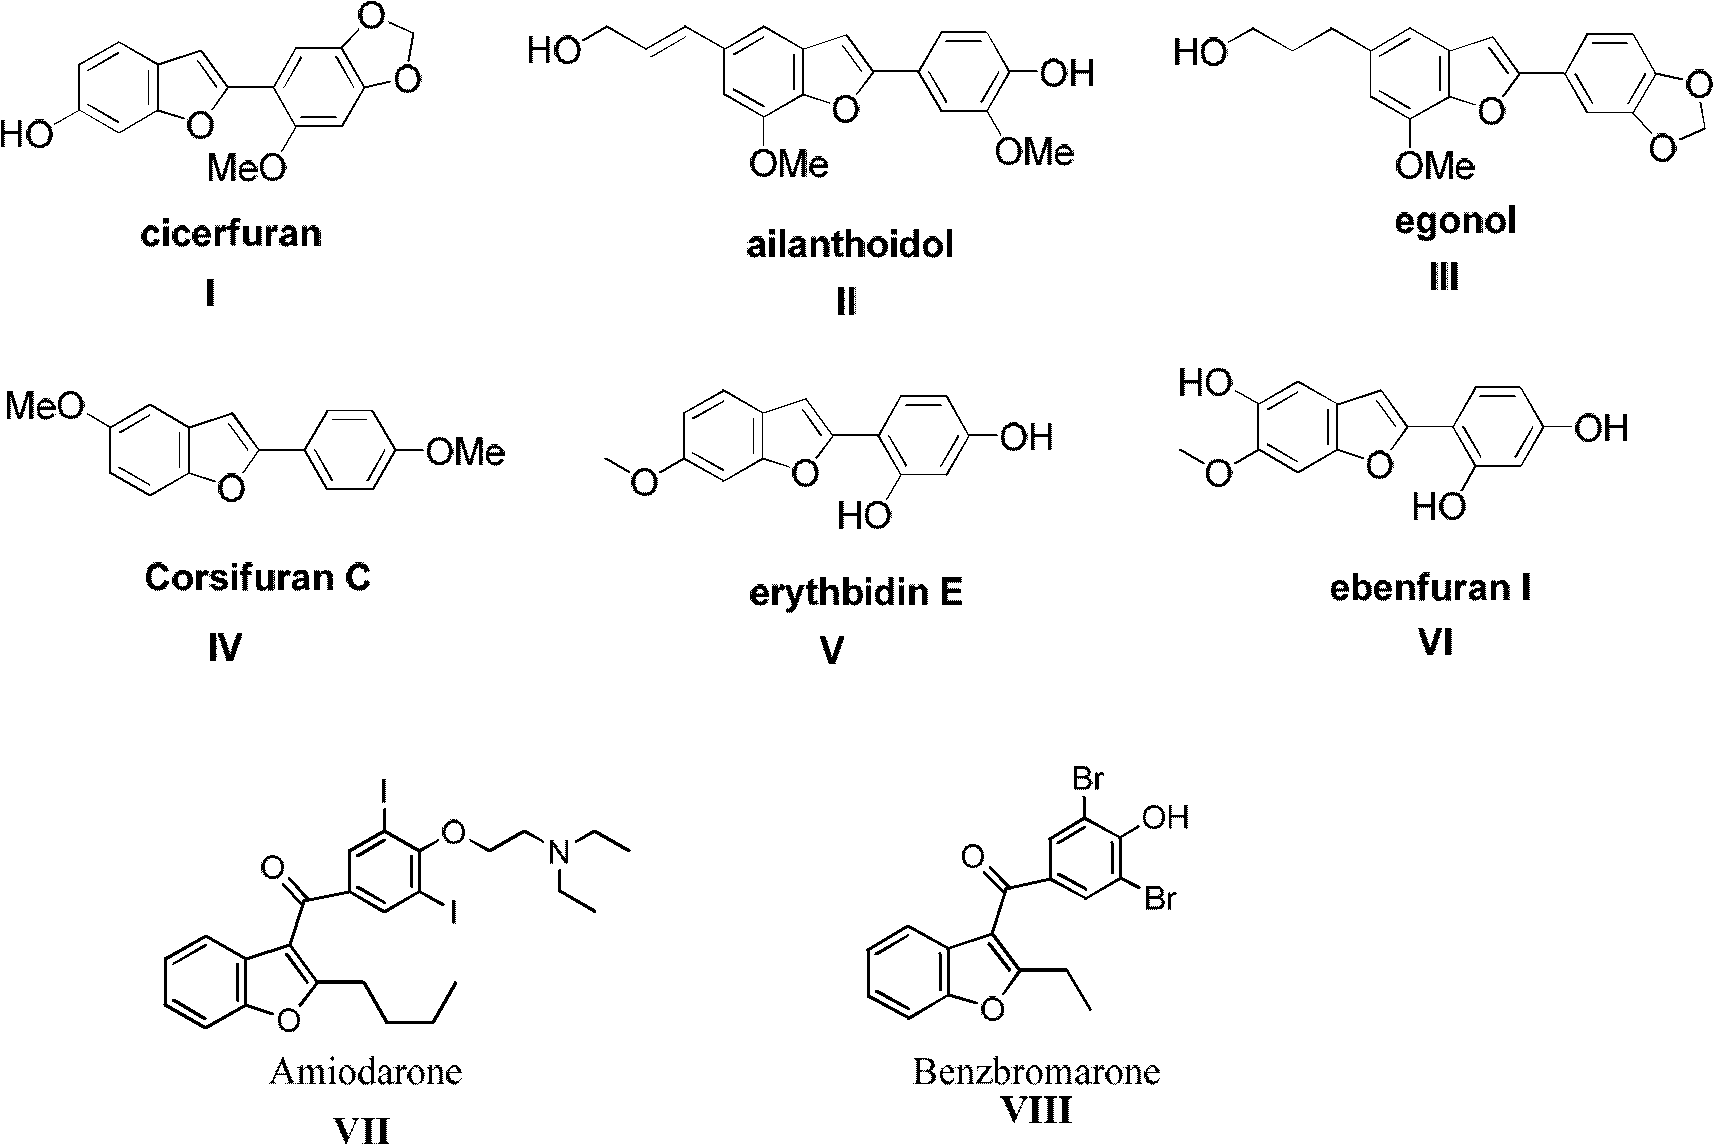 Method for synthesizing benzofuran derivatives in one pot process